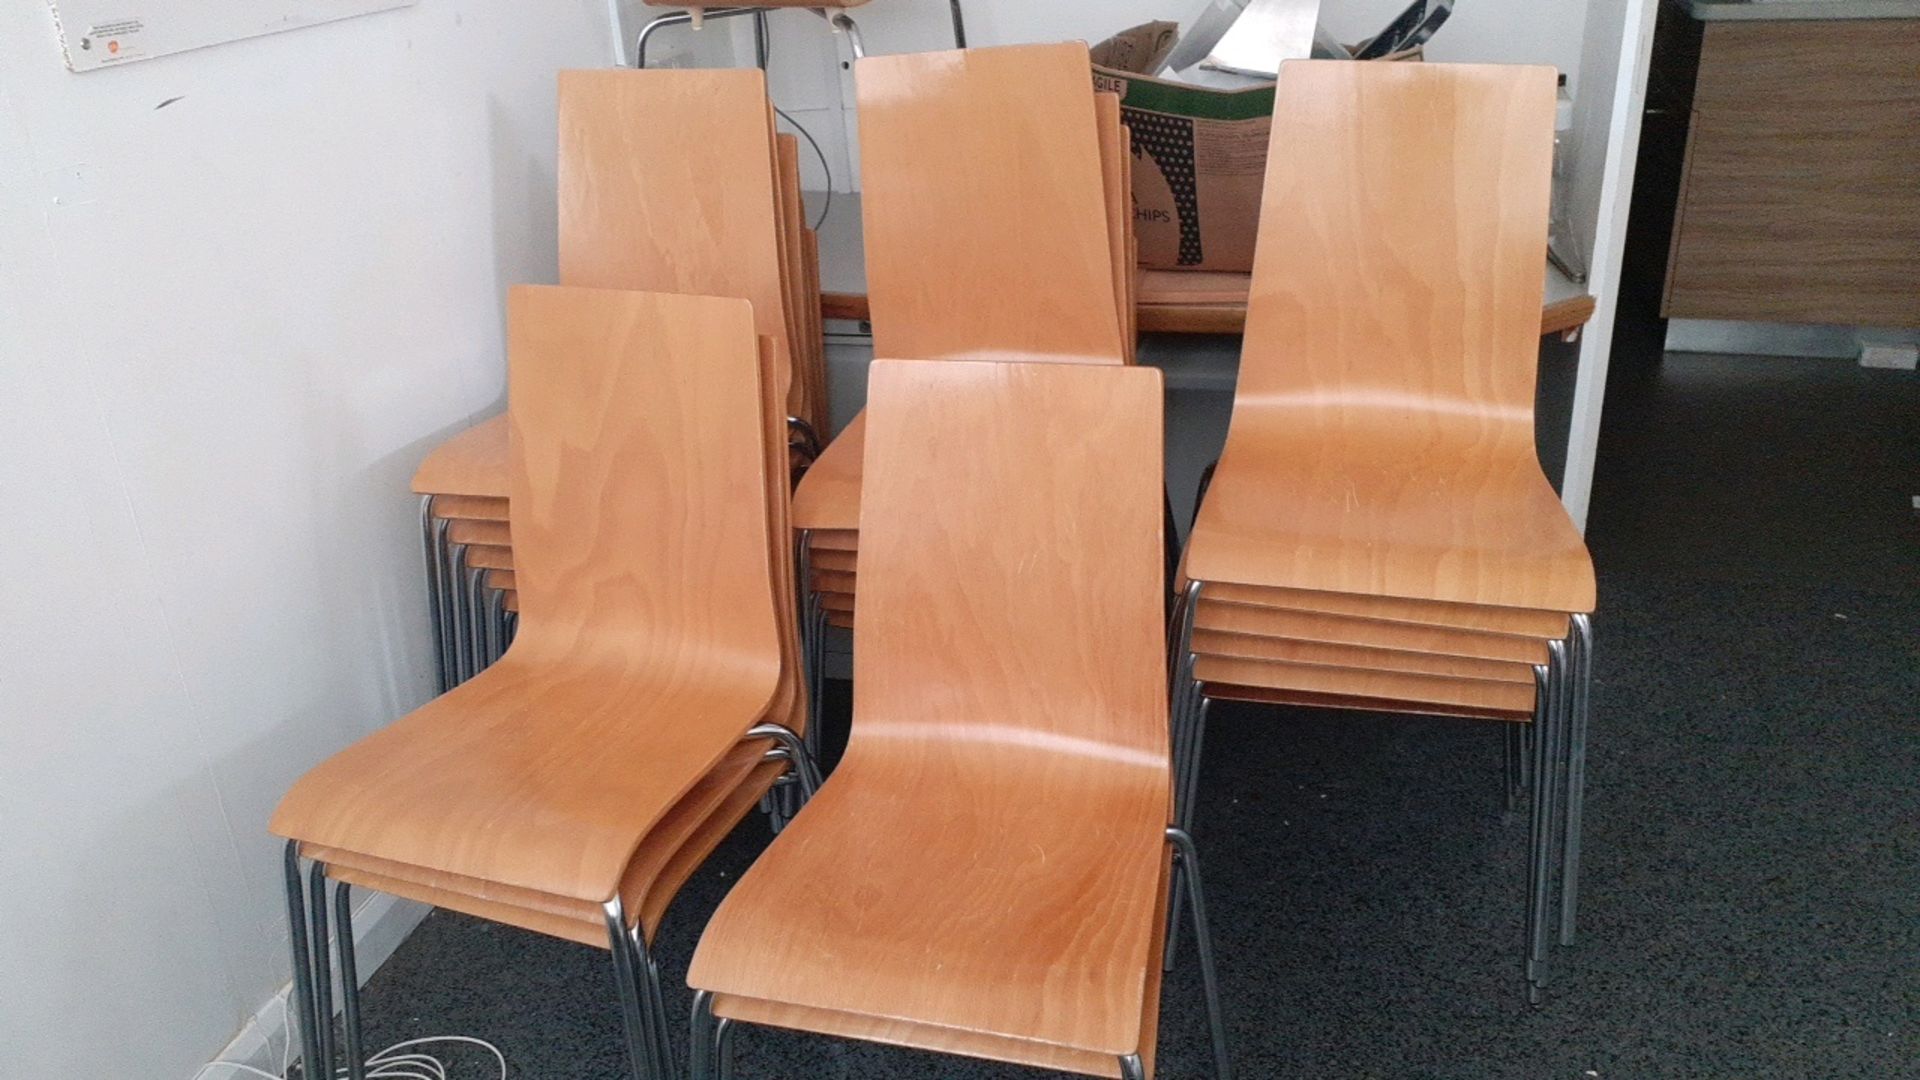 Canteen chairs